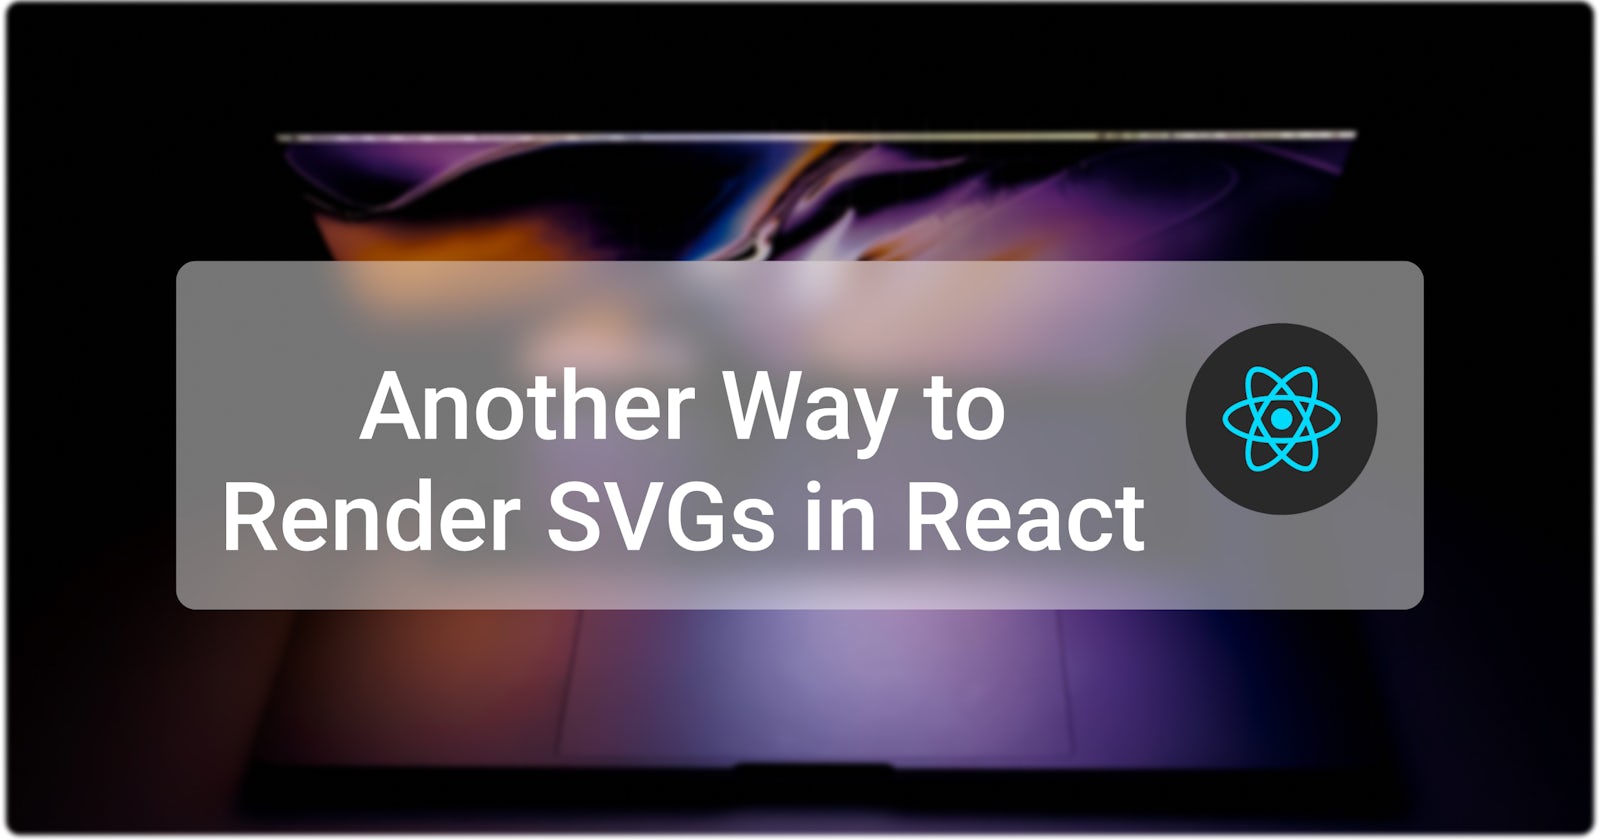 Another Way to Render SVGs in React